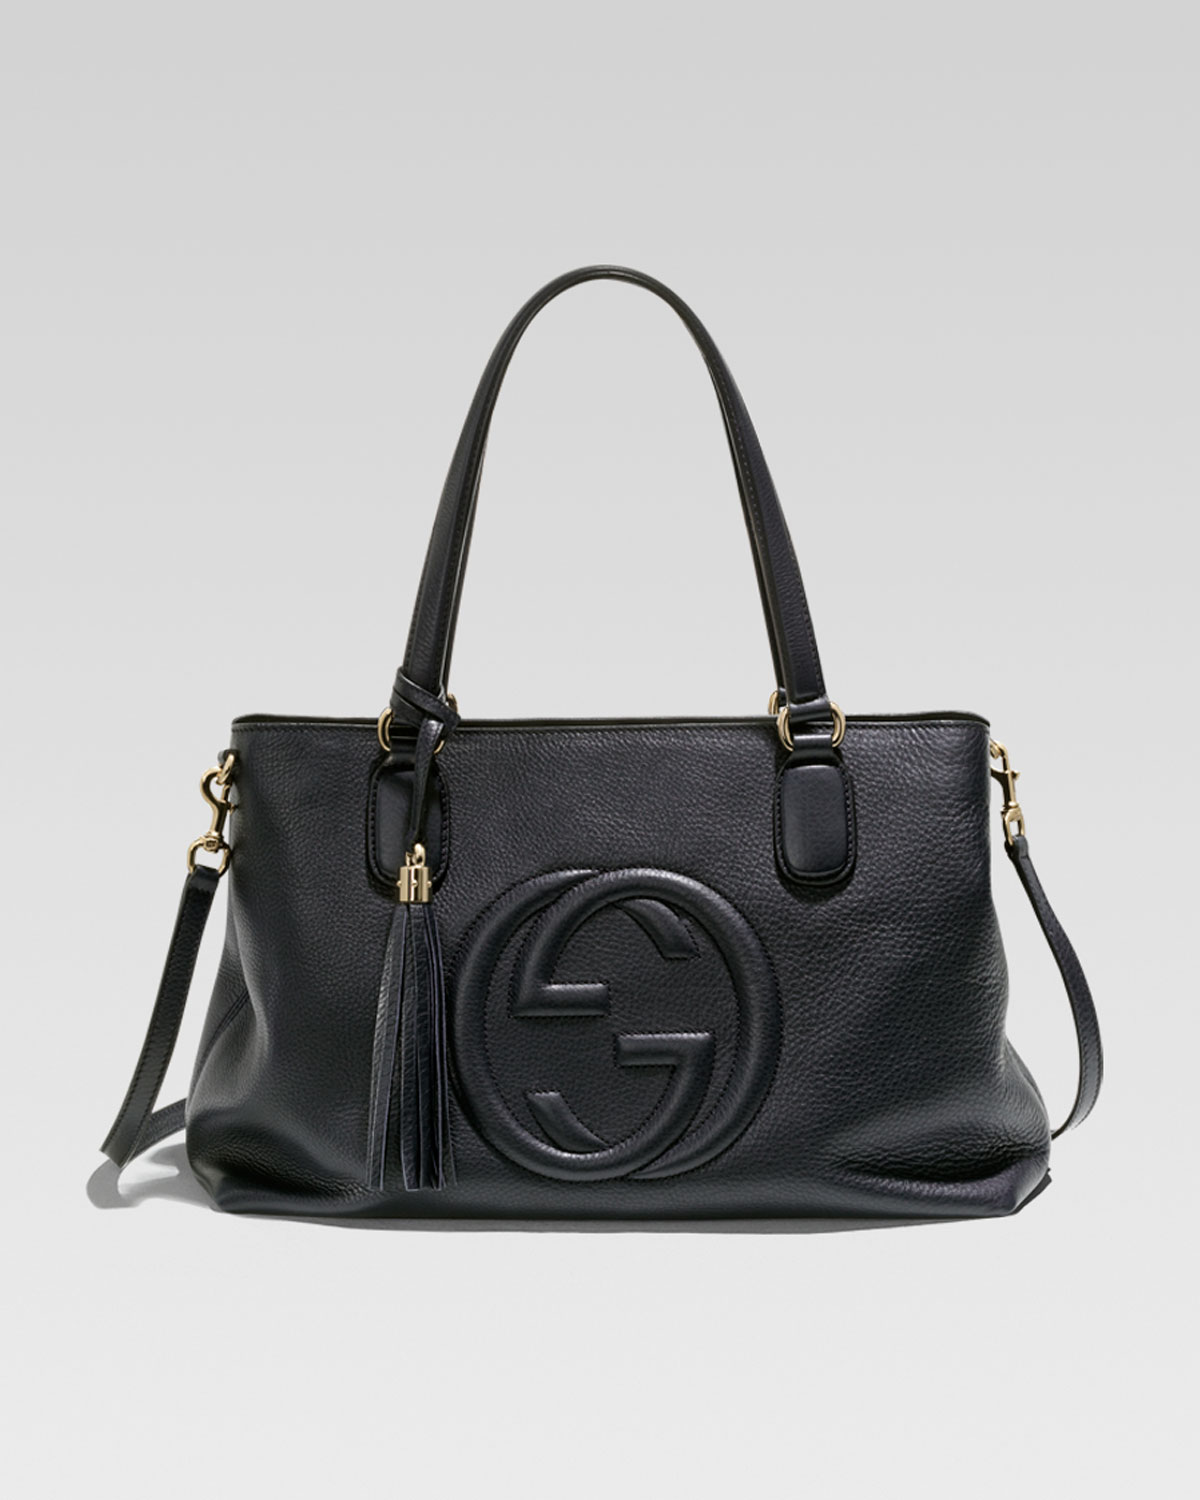 Gucci Soho Black Leather Working Tote - Lyst